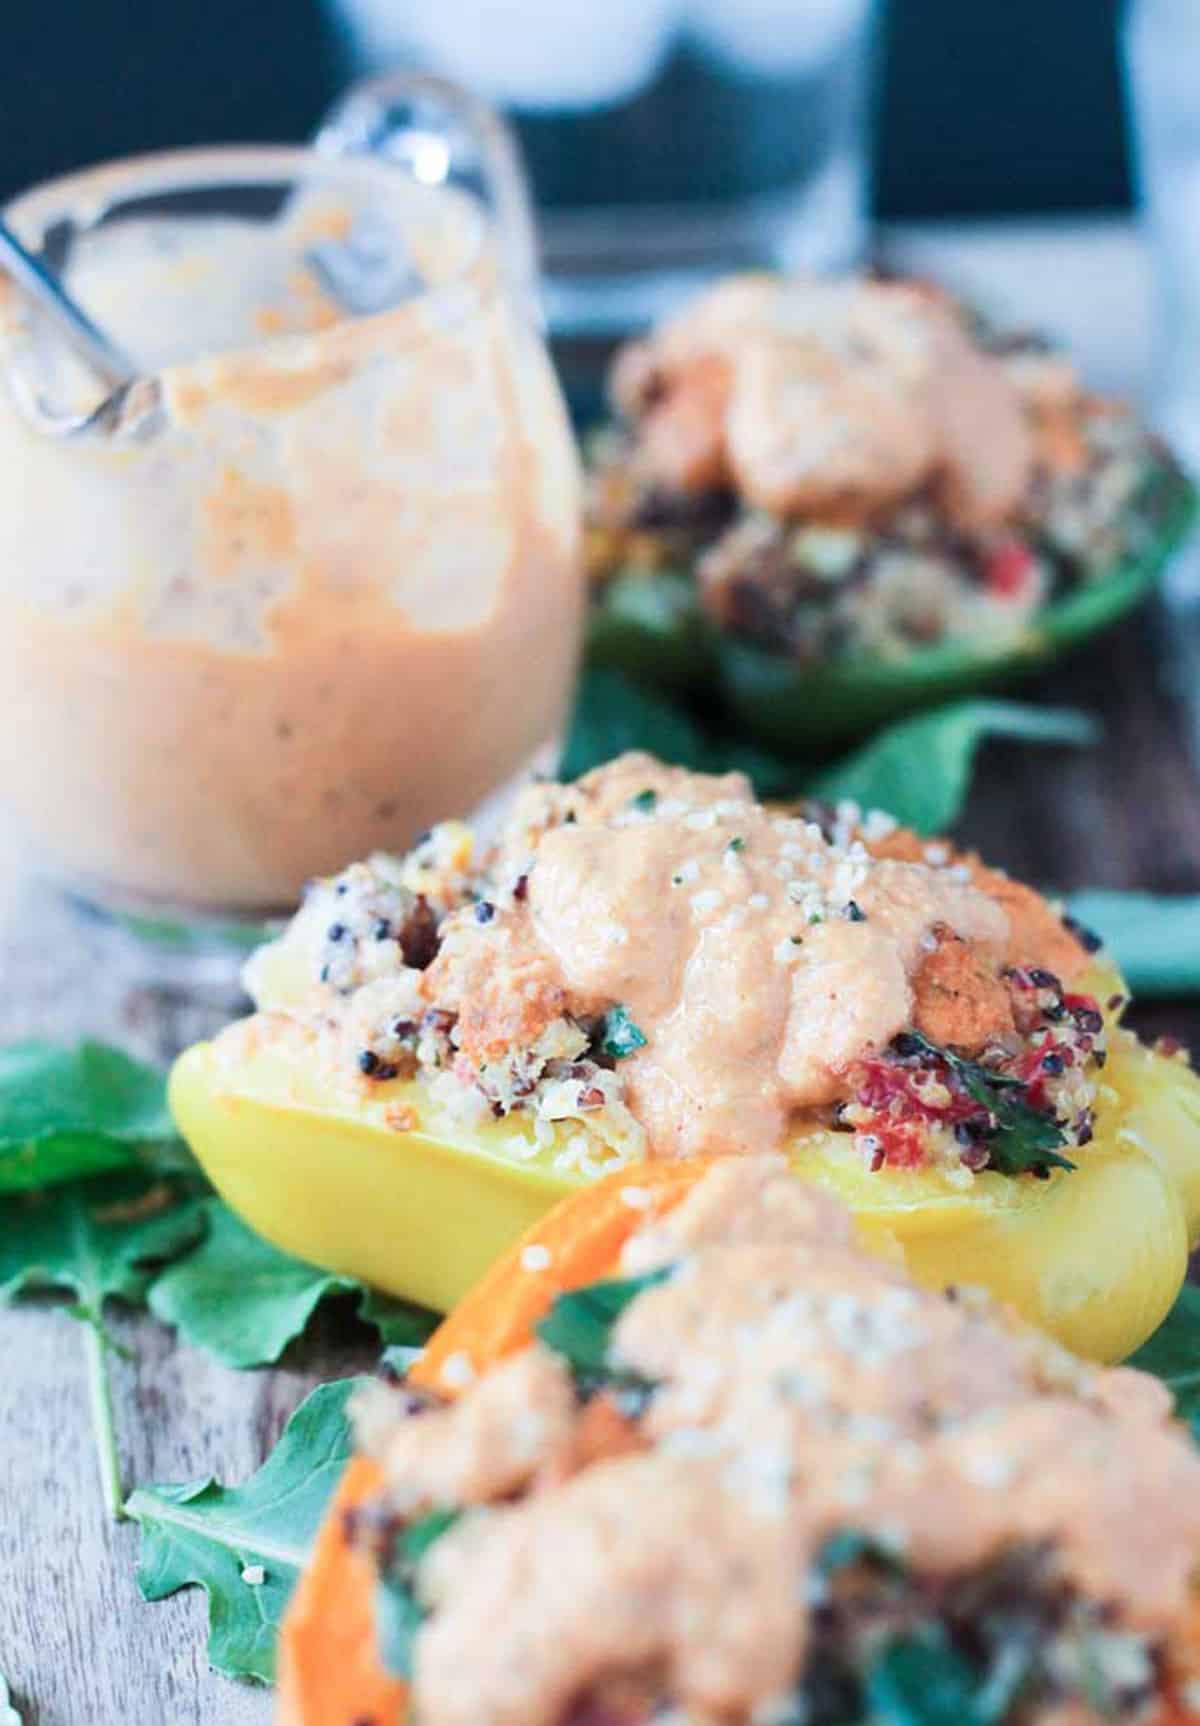 Creamy roasted red pepper drizzled on top stuffed peppers.